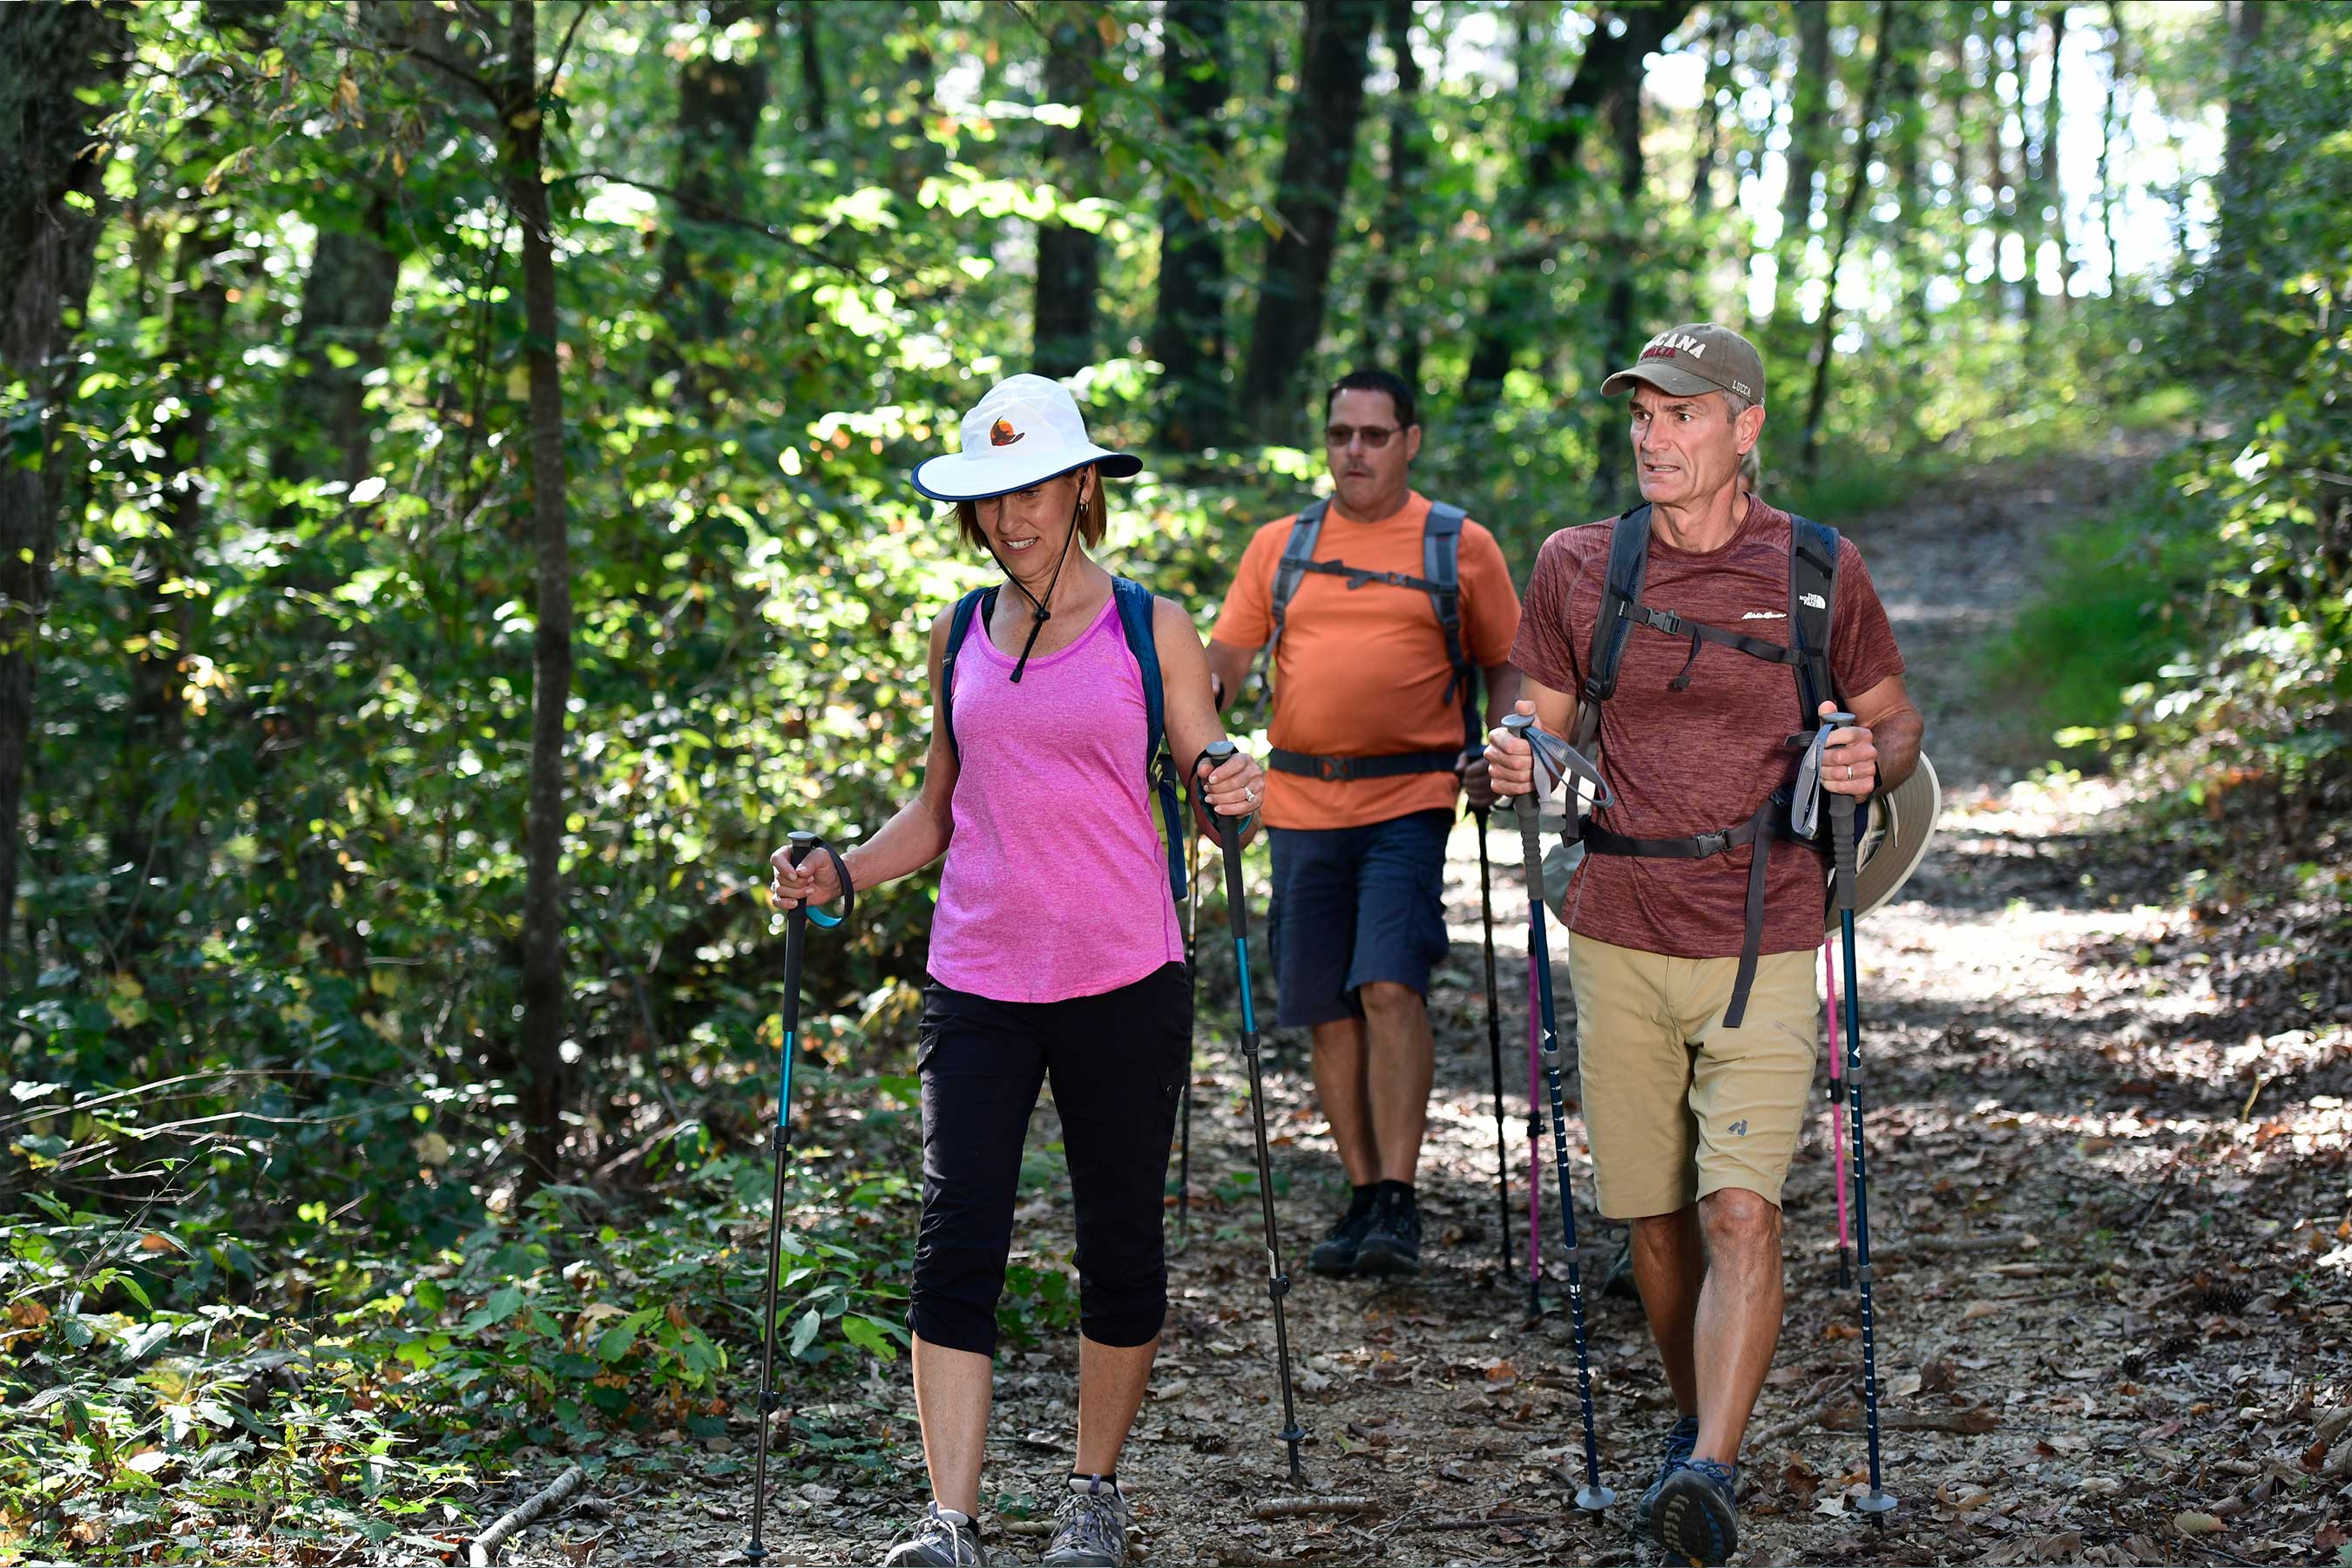 Tellico Village boasts 20-plus miles of hiking trails, tying the beauty of East Tennessee to The Village.